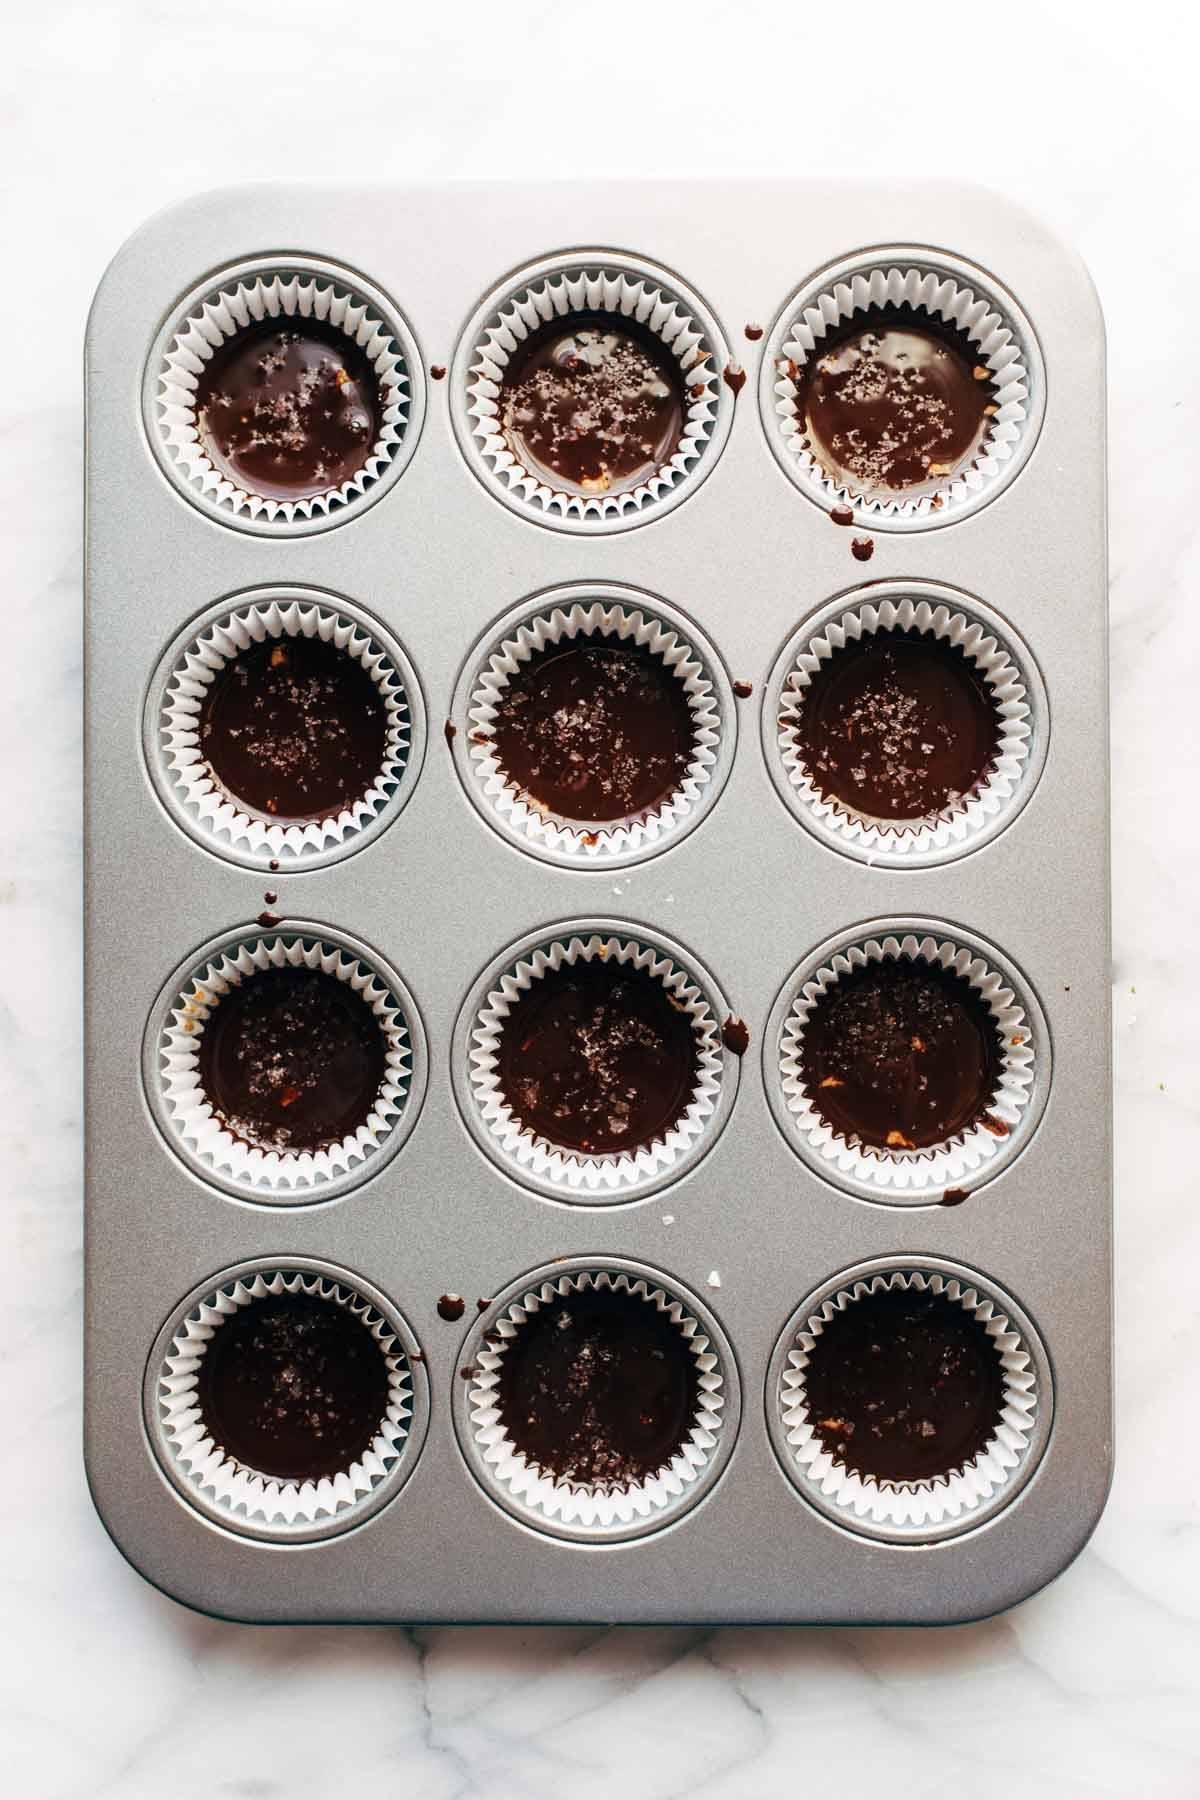 Almond butter cups in muffin pan.